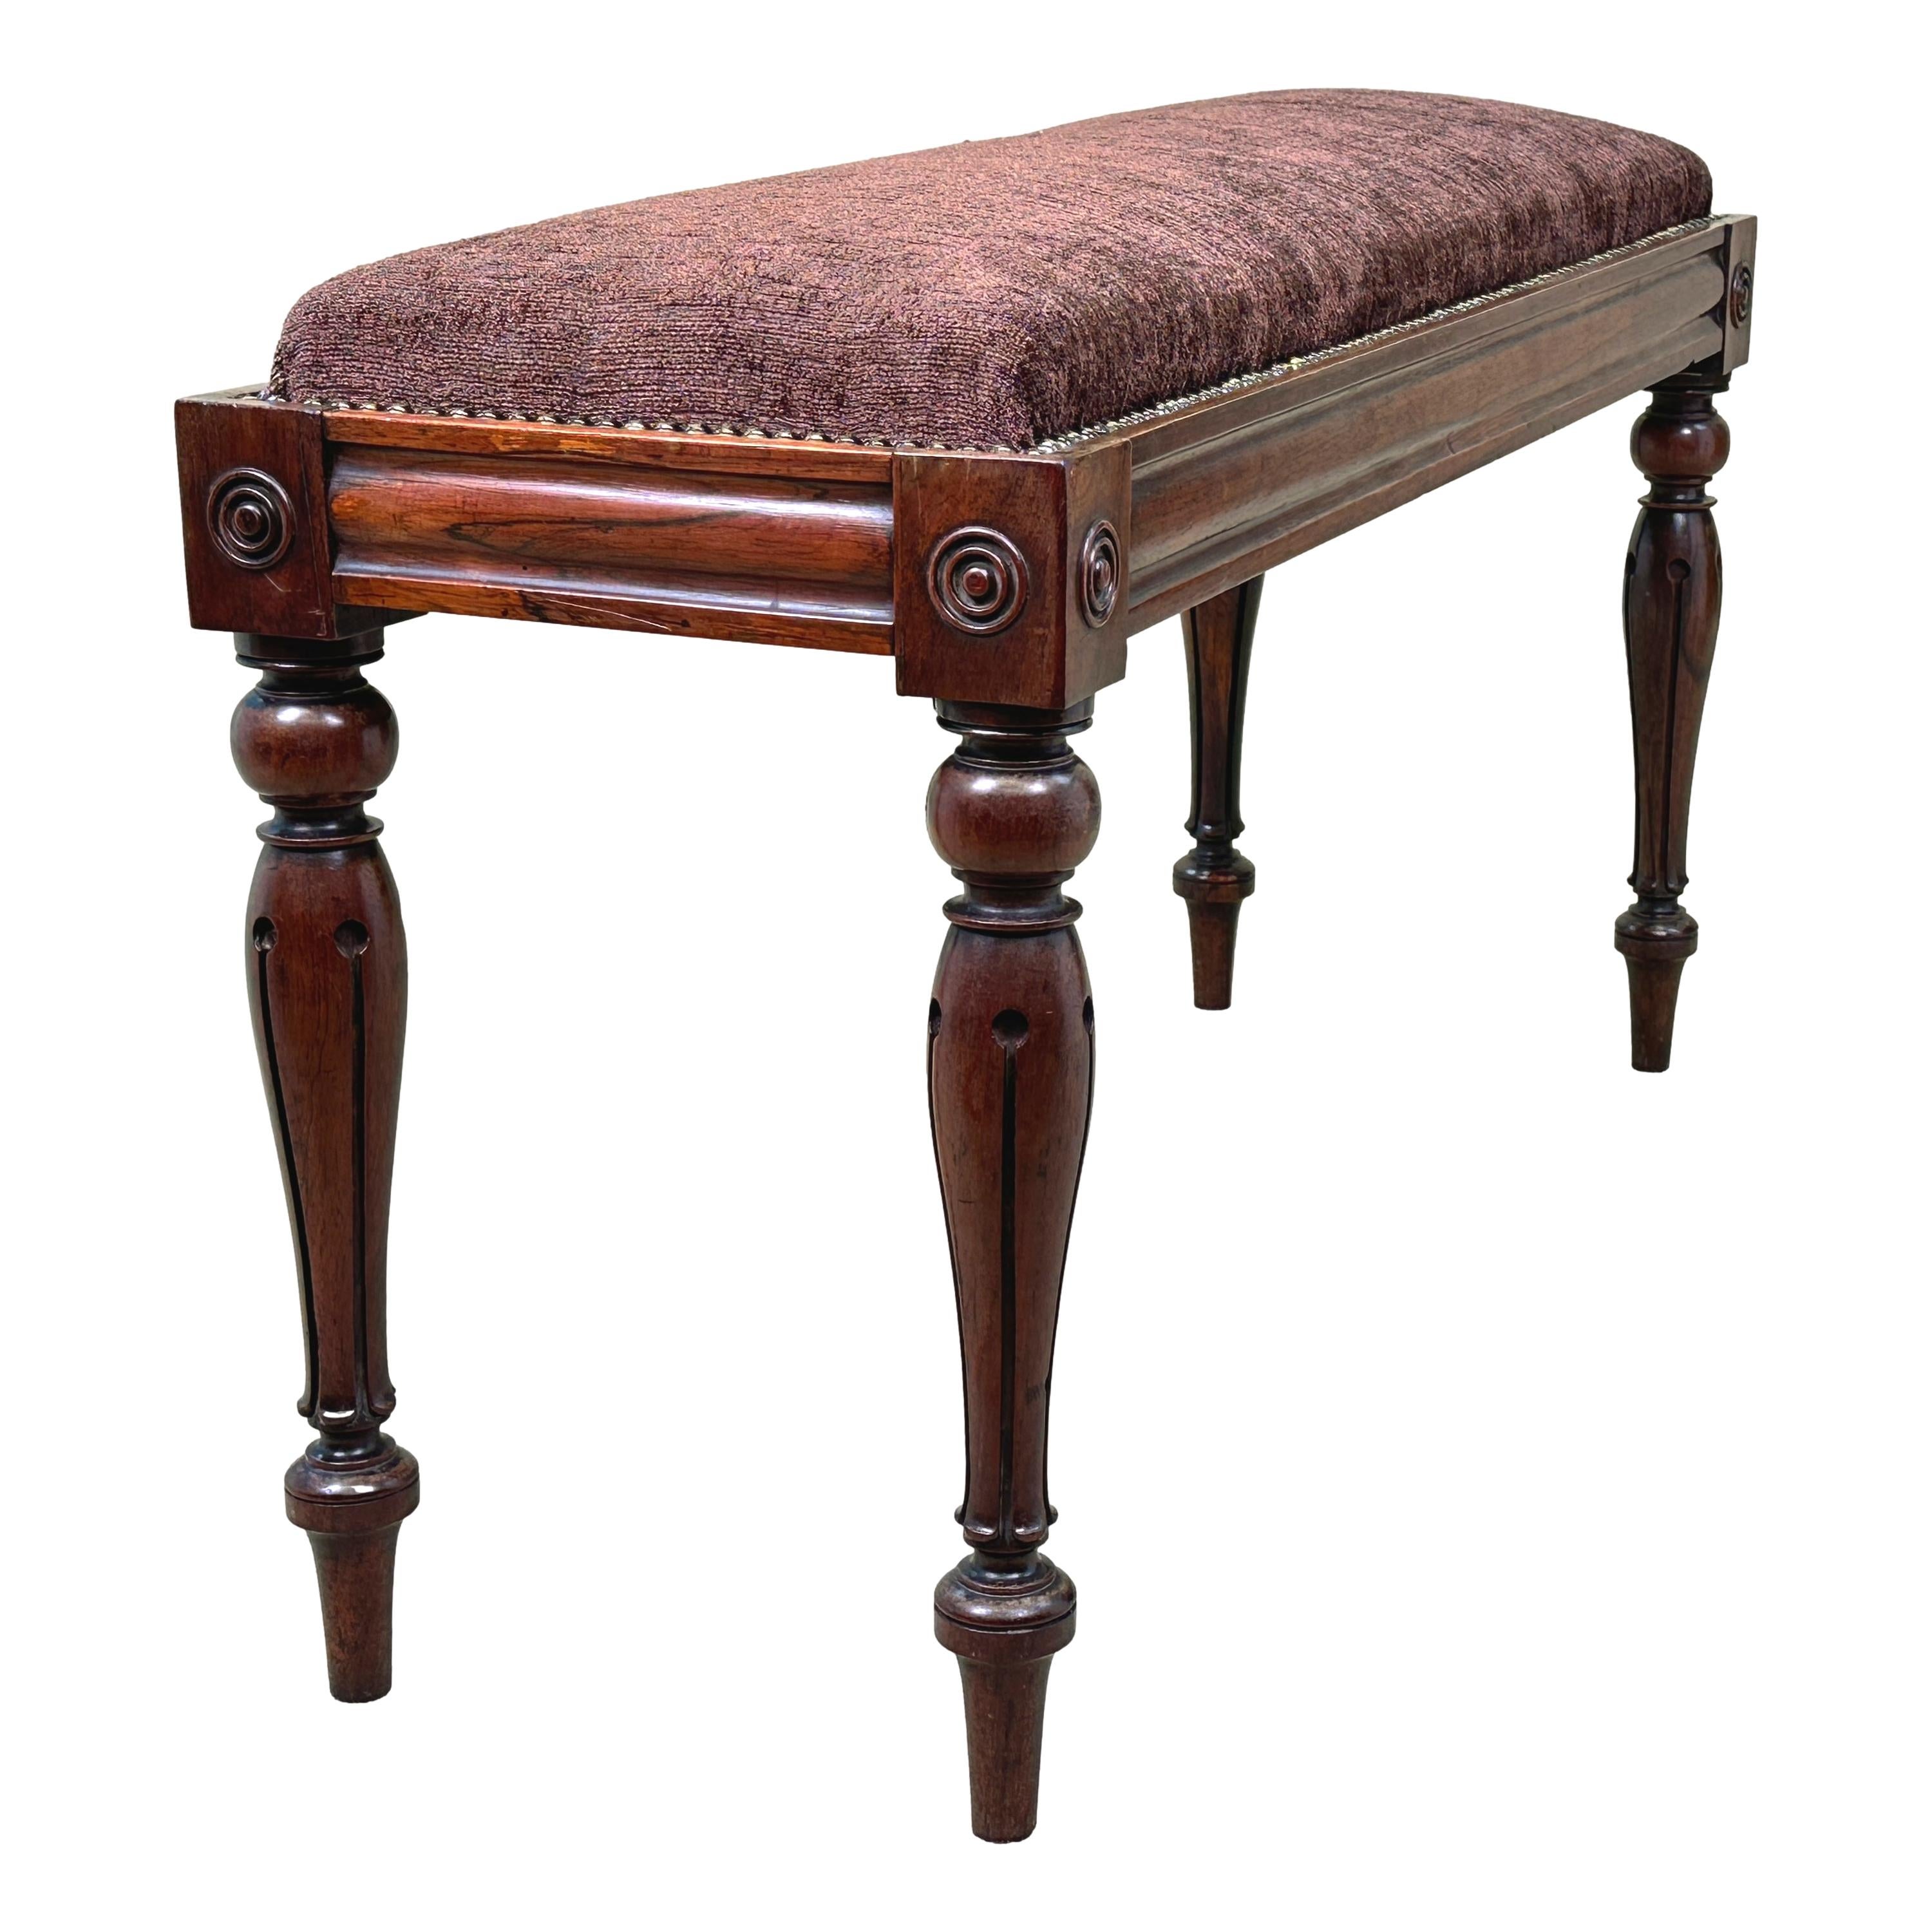 A Very Good Quality Late Regency Period, 19th Century, Rosewood Duet Stool, Or Piano Stool, Having Upholstered Rectangular Seat Over Well Figured Frame With Moulded Channel And Applied Roundel Decoration, Raised On Elegant Bulbous Turned And